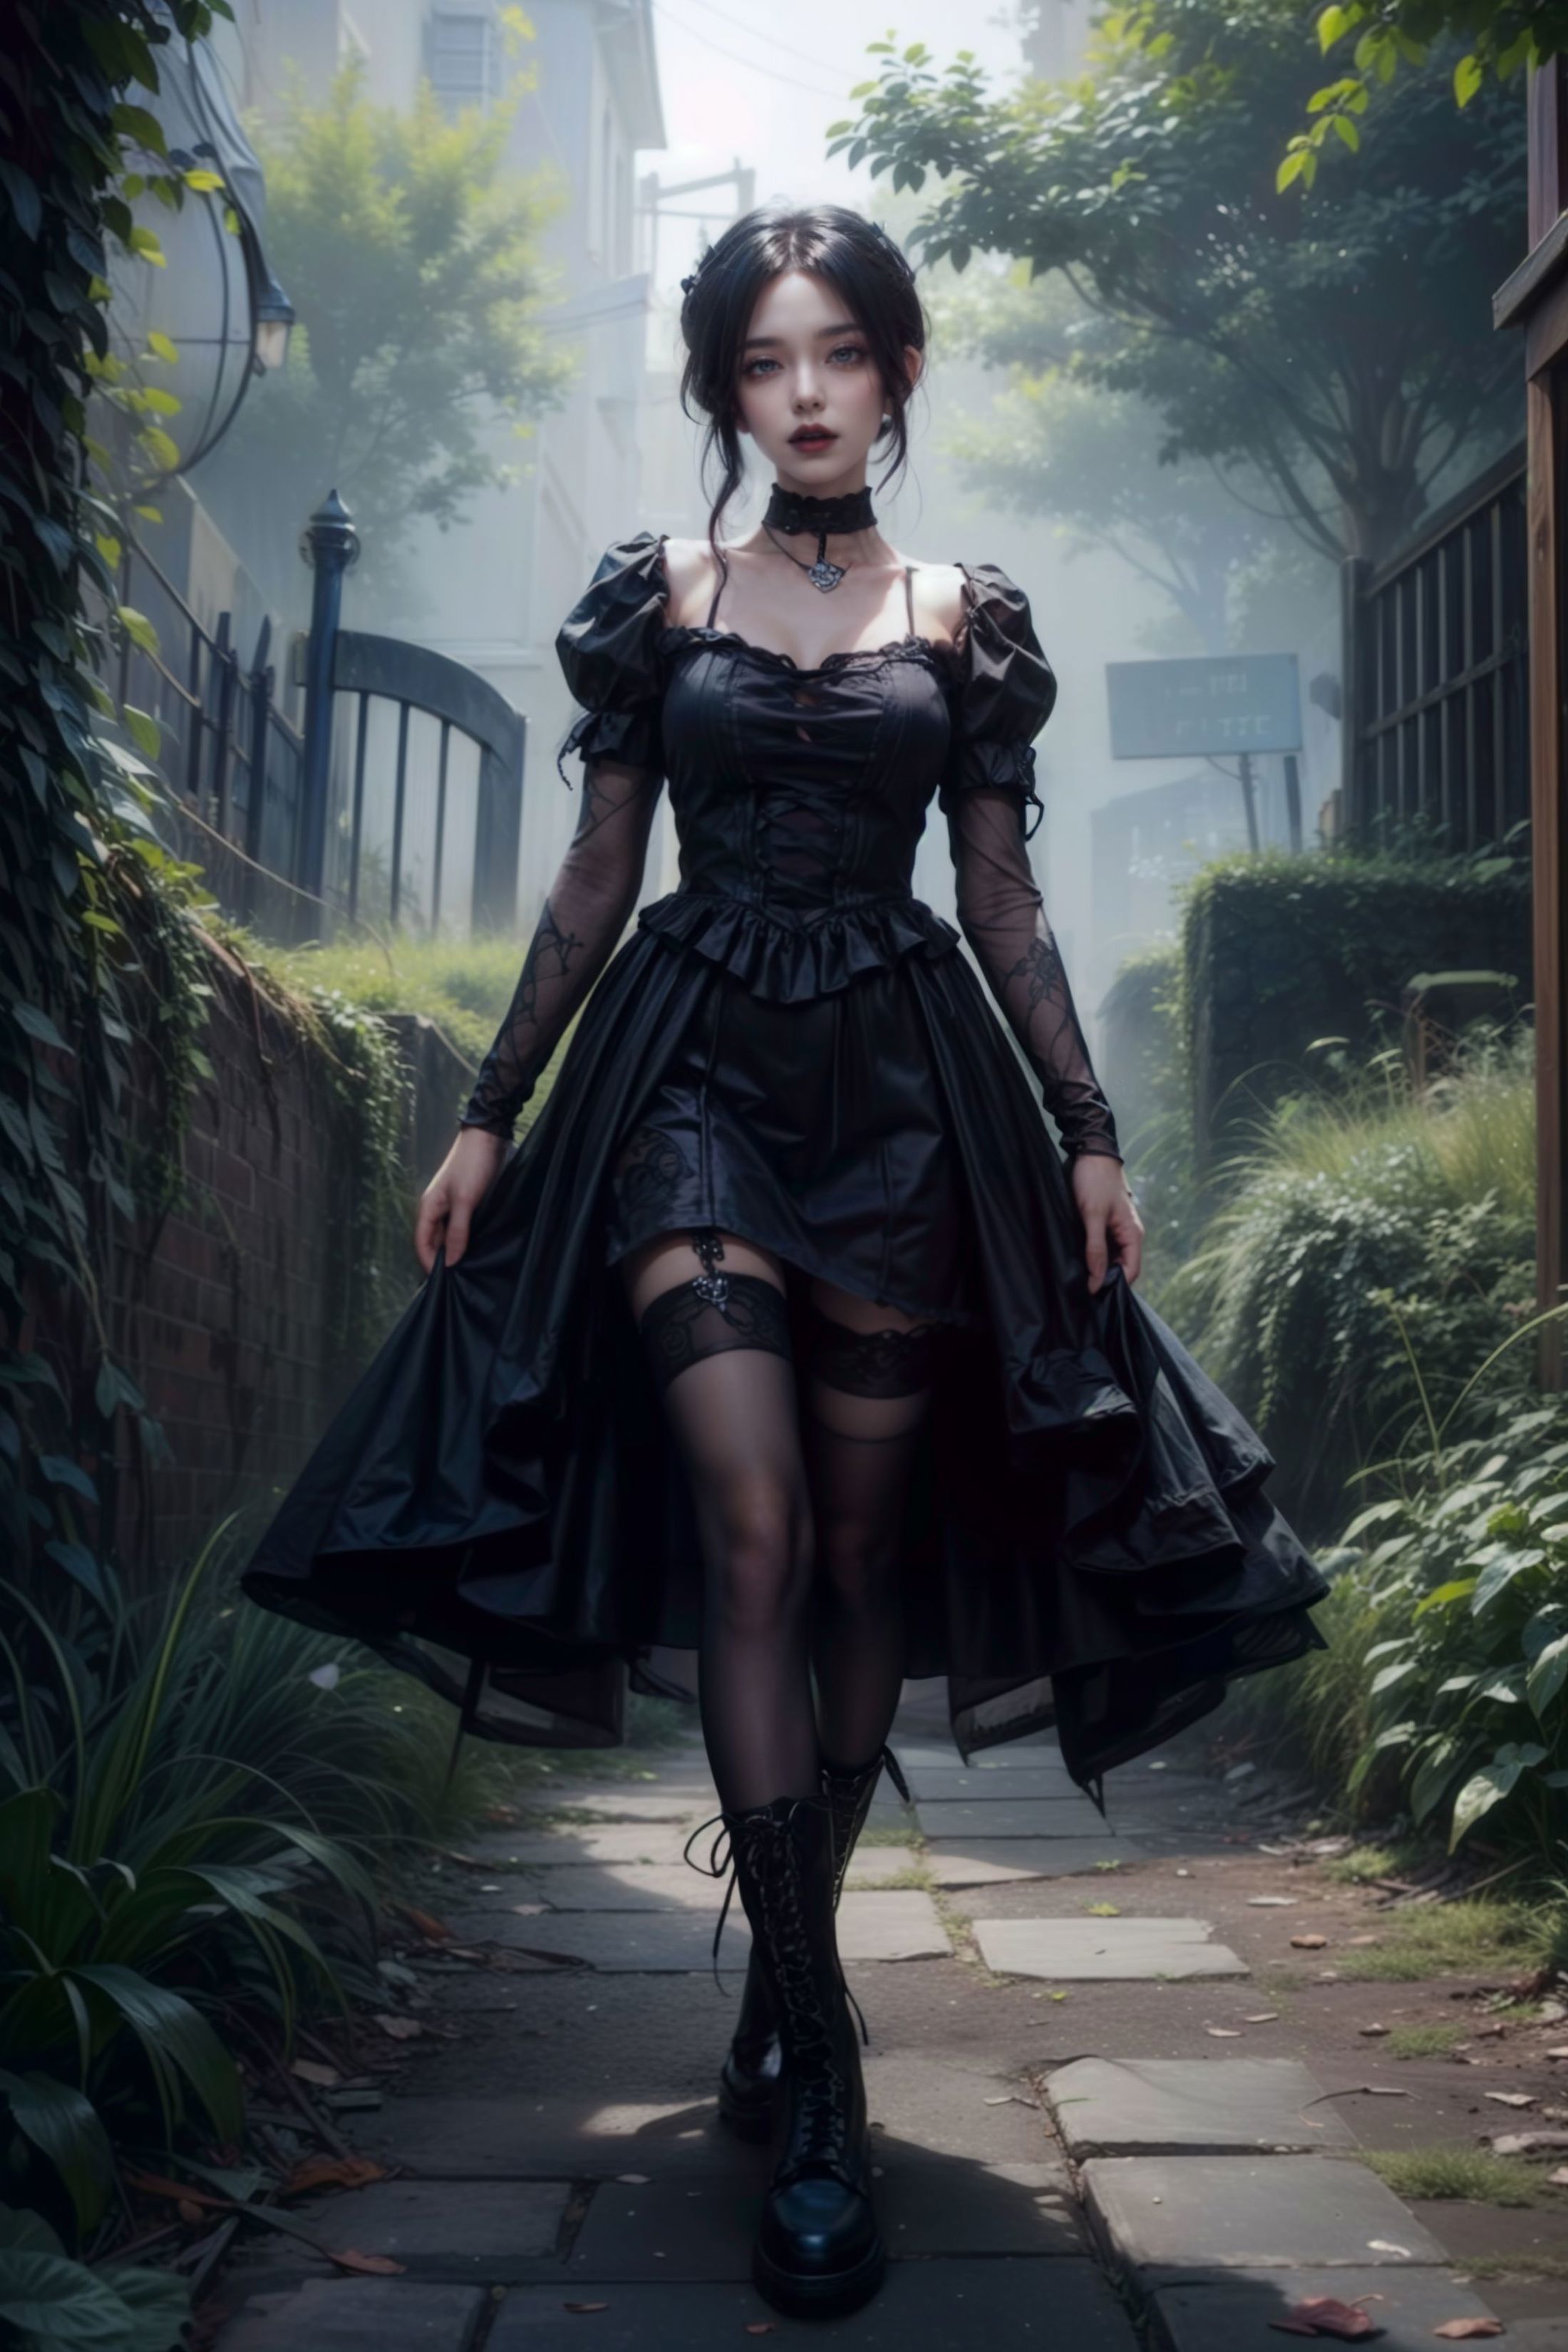 A woman in a black dress and boots walking down a path.